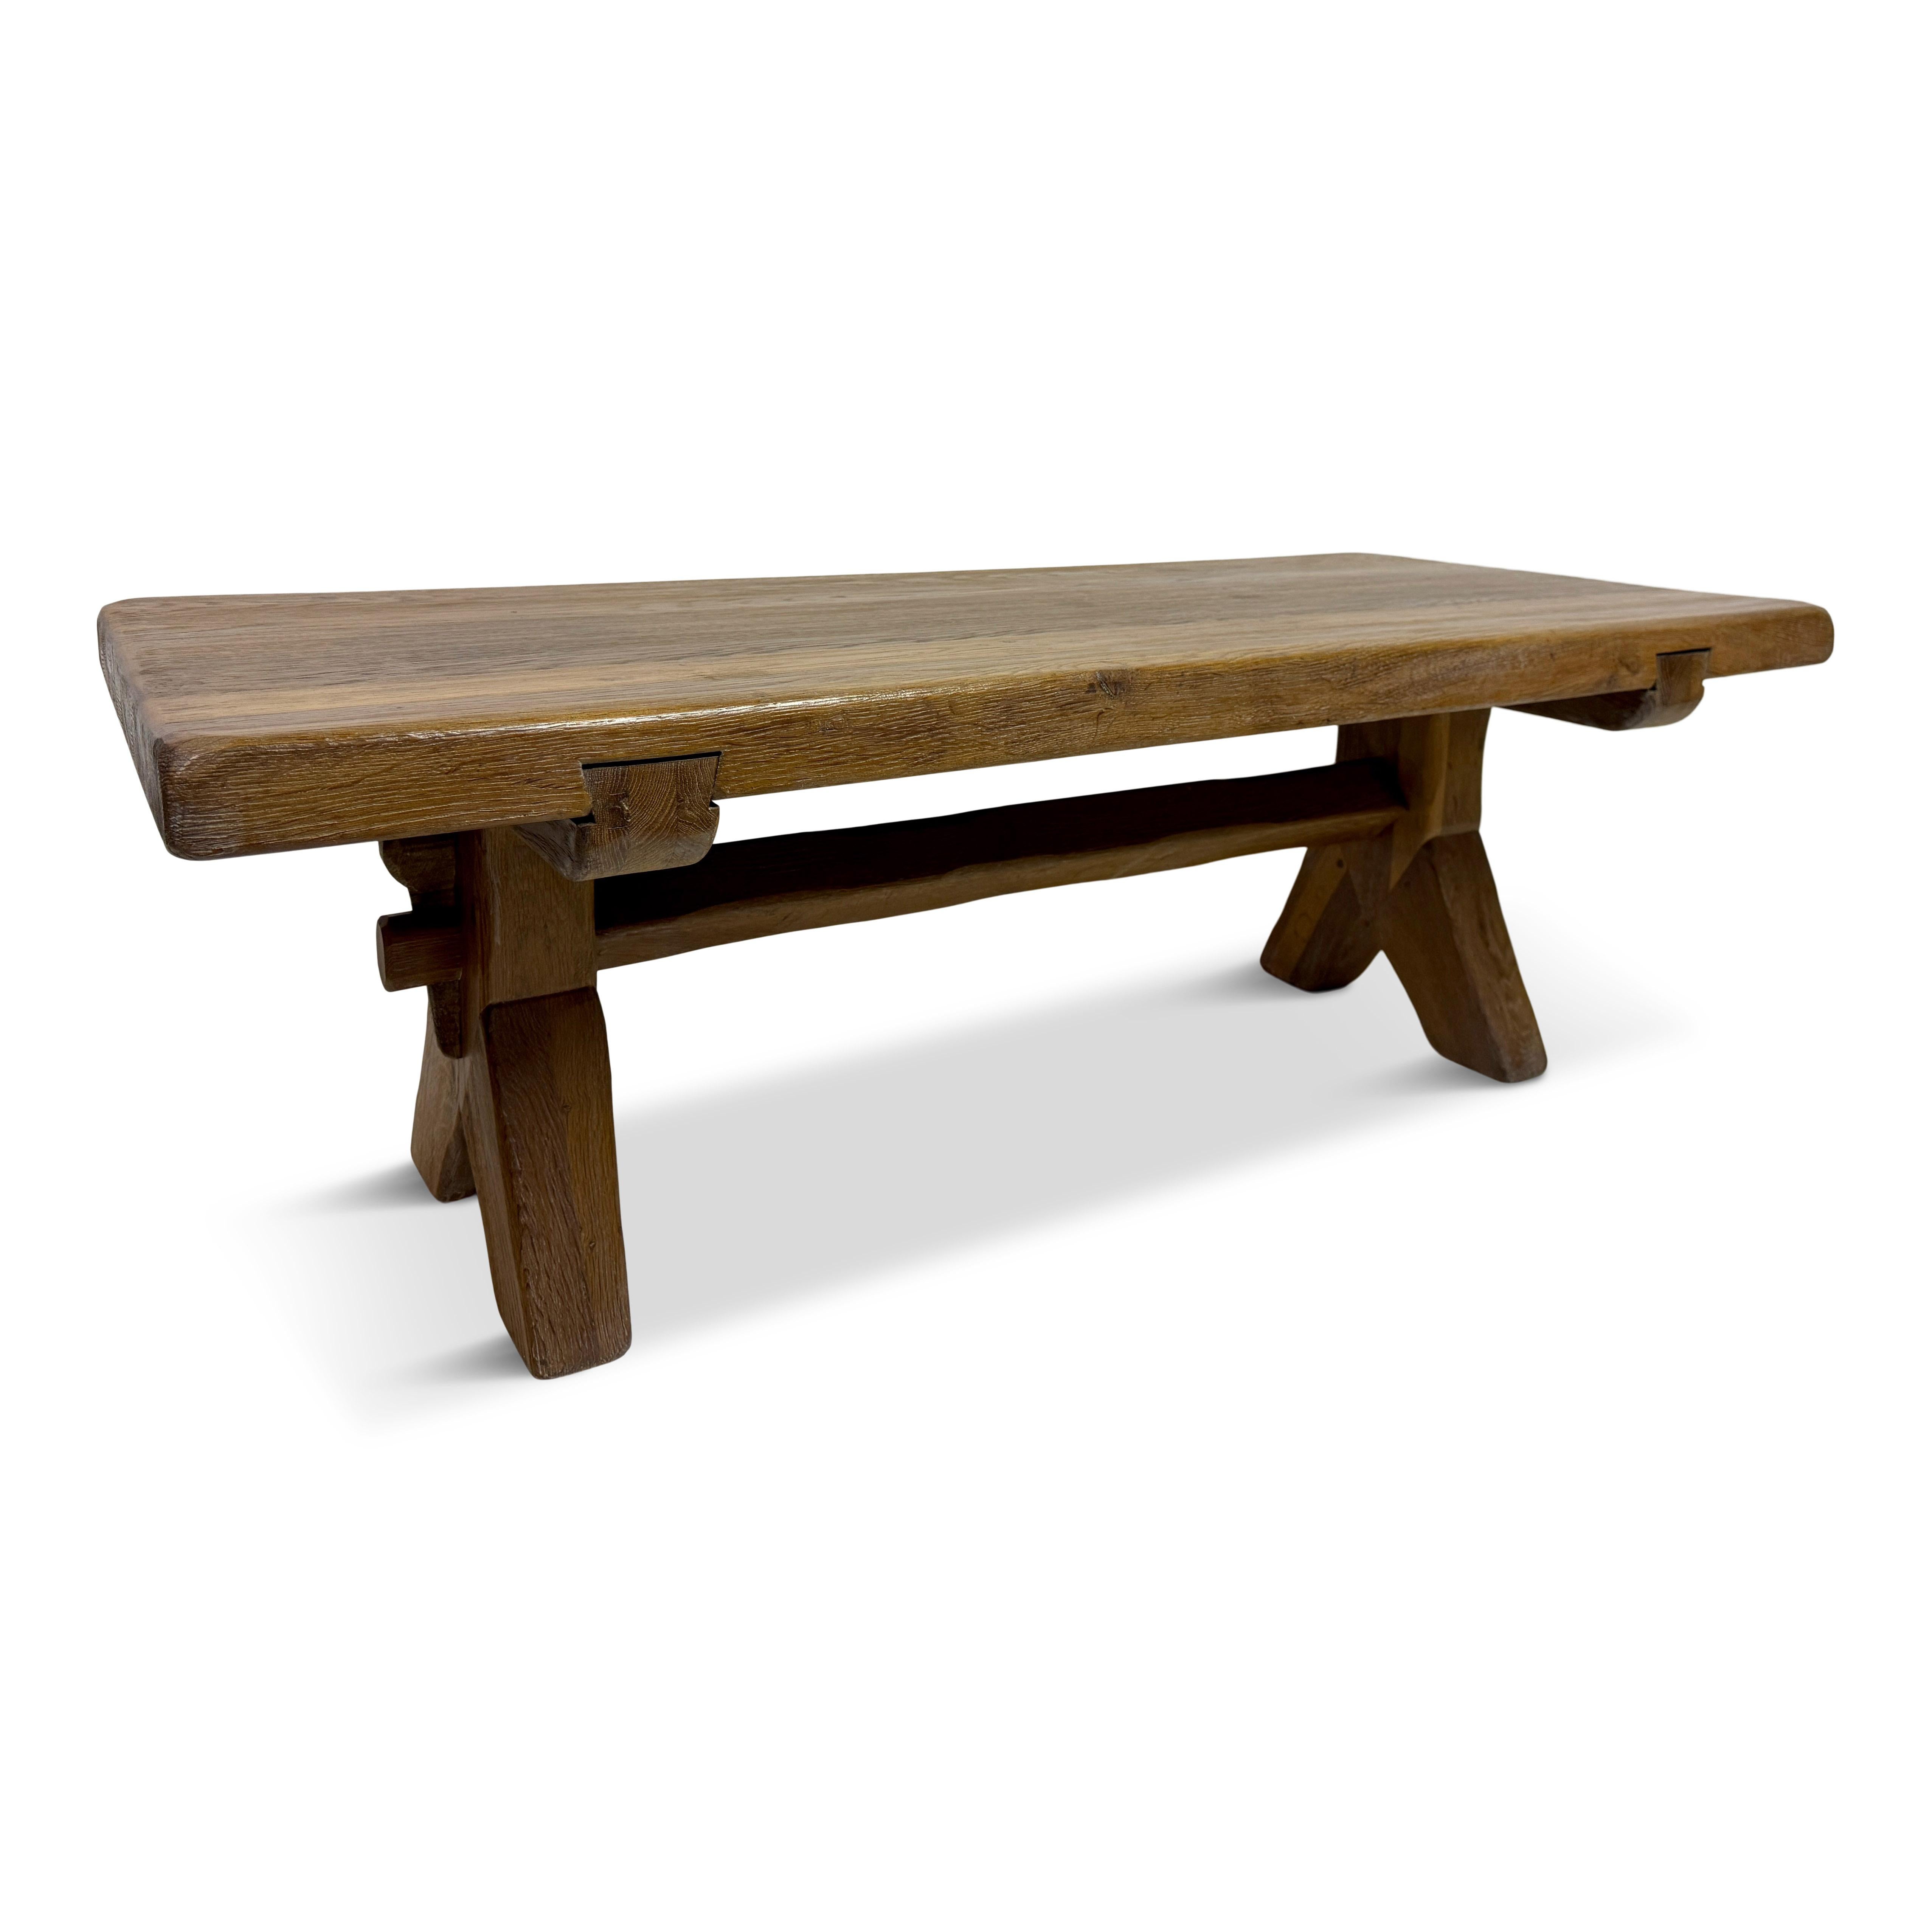 Coffee table

Oak 

By De Puydt

Brutalist

Nicely constructed

Pegged joints

Belgium 1950s/1960s